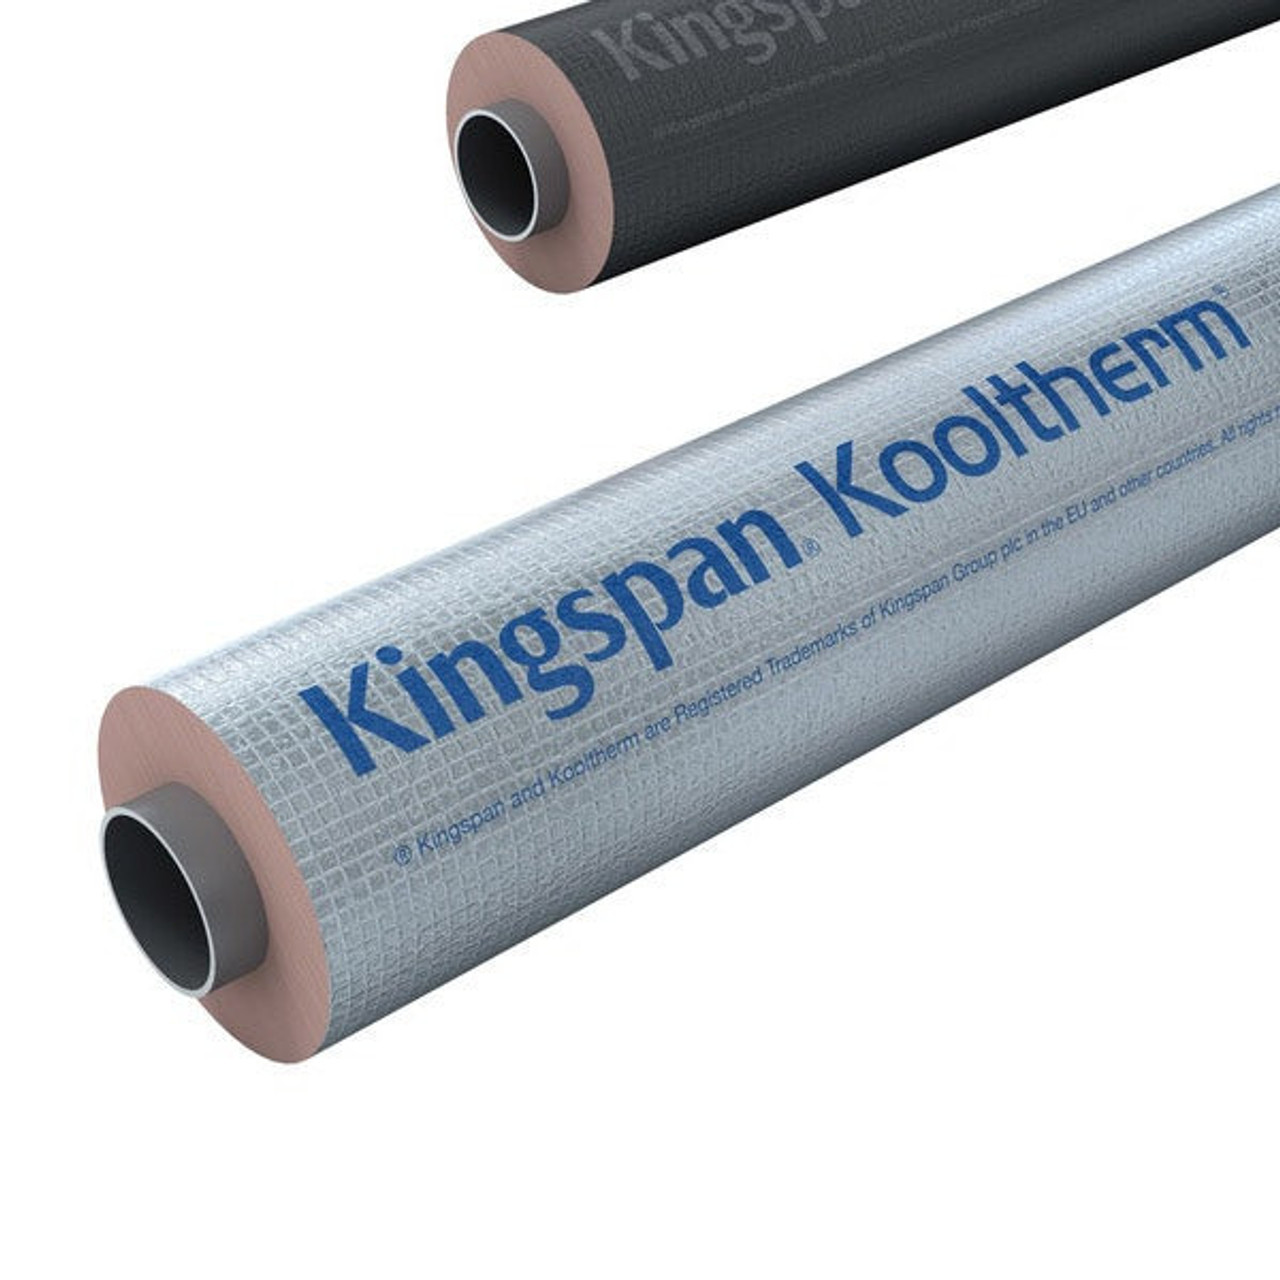 Kooltherm FM Pipe Insulation Lagging by Kingspan - 48mm x 25mm x 1m  251480488 KGS-50353